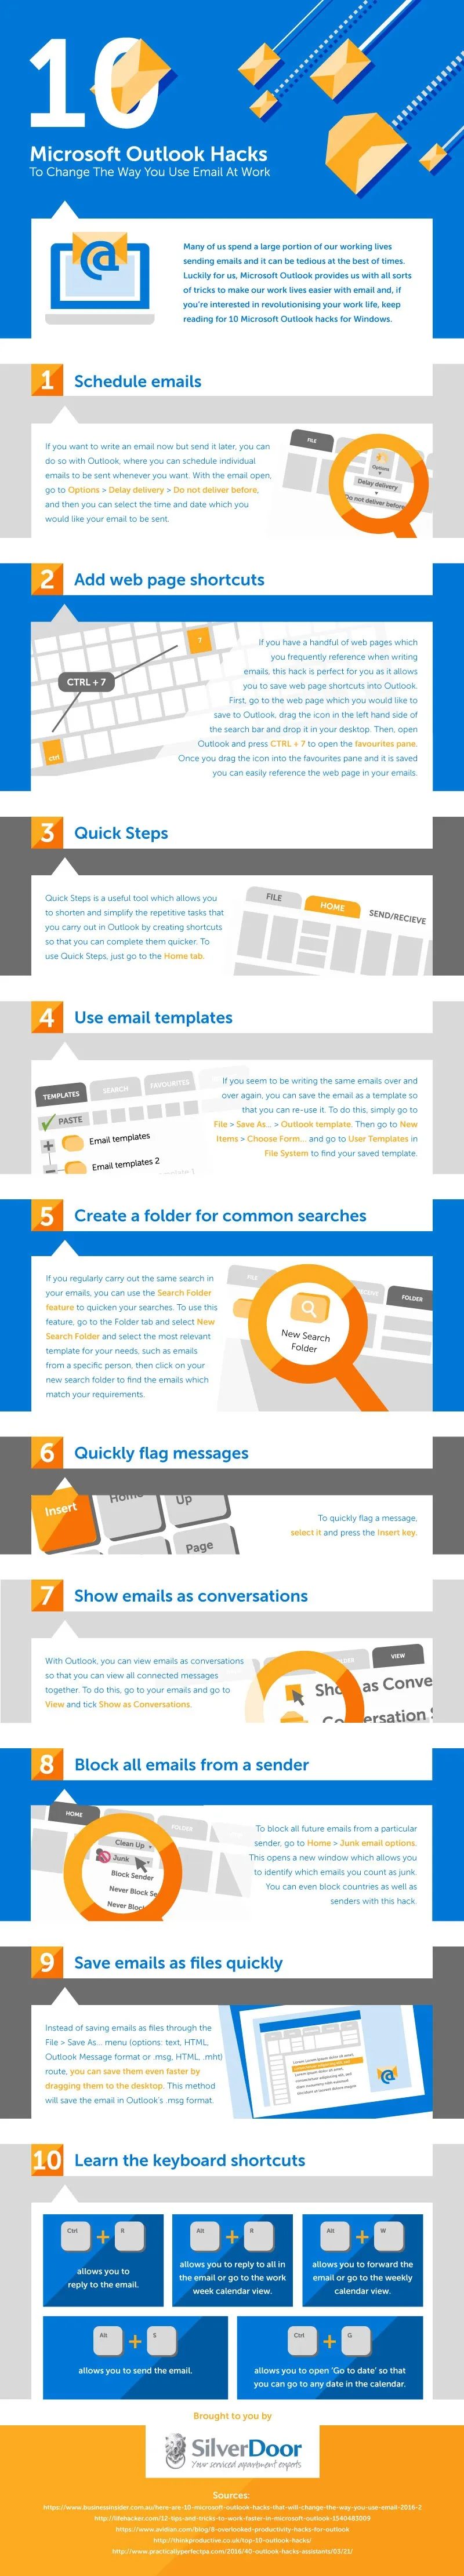 10 Microsoft Outlook Hacks To Change The Way You Use Email At Work - #Infographic